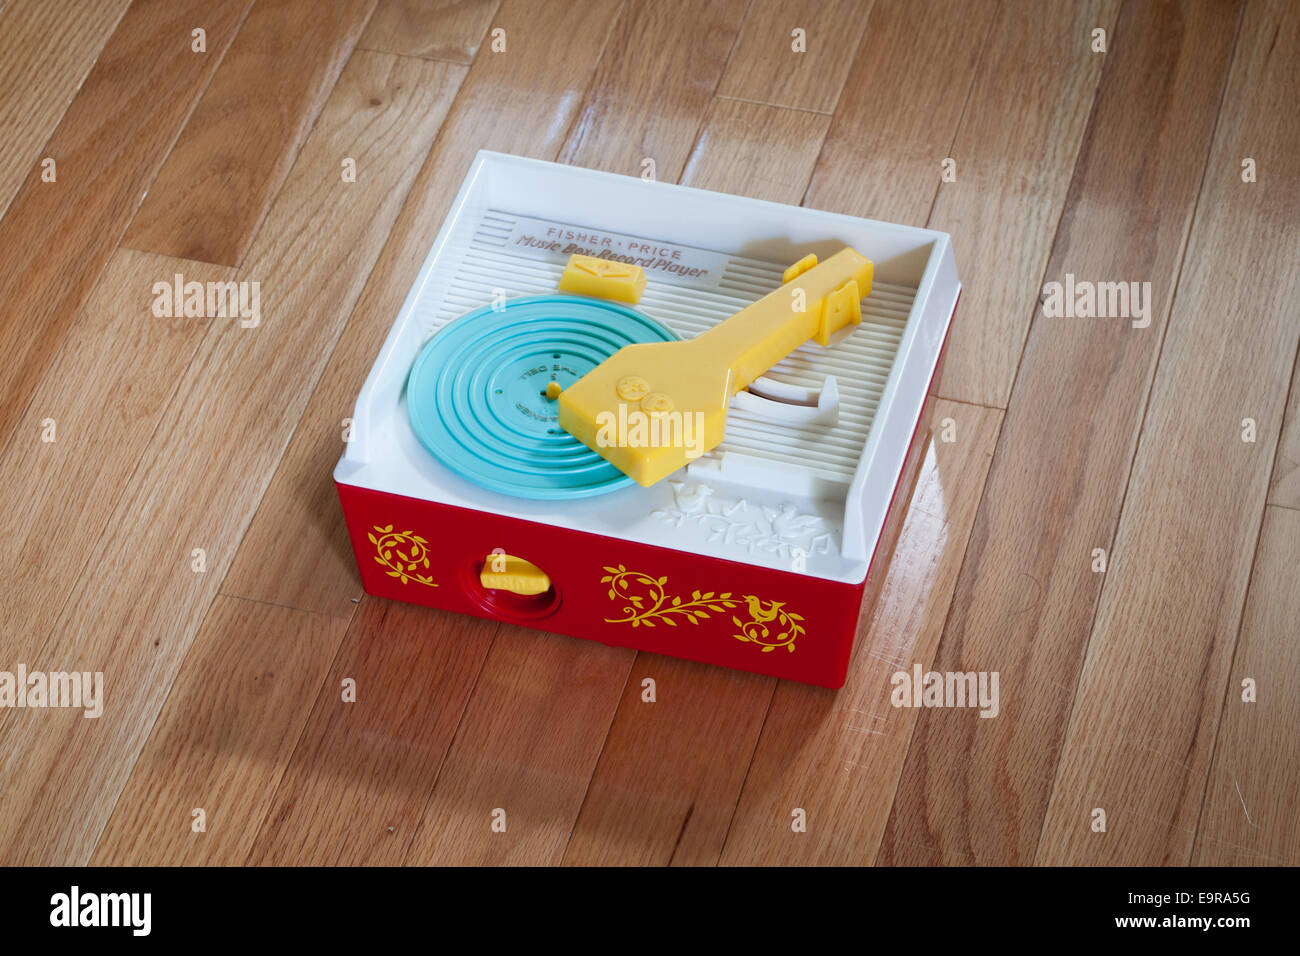 A Fisher-Price Classic Record Player (Fisher Price Change-A-Record Music Box). Stock Photo